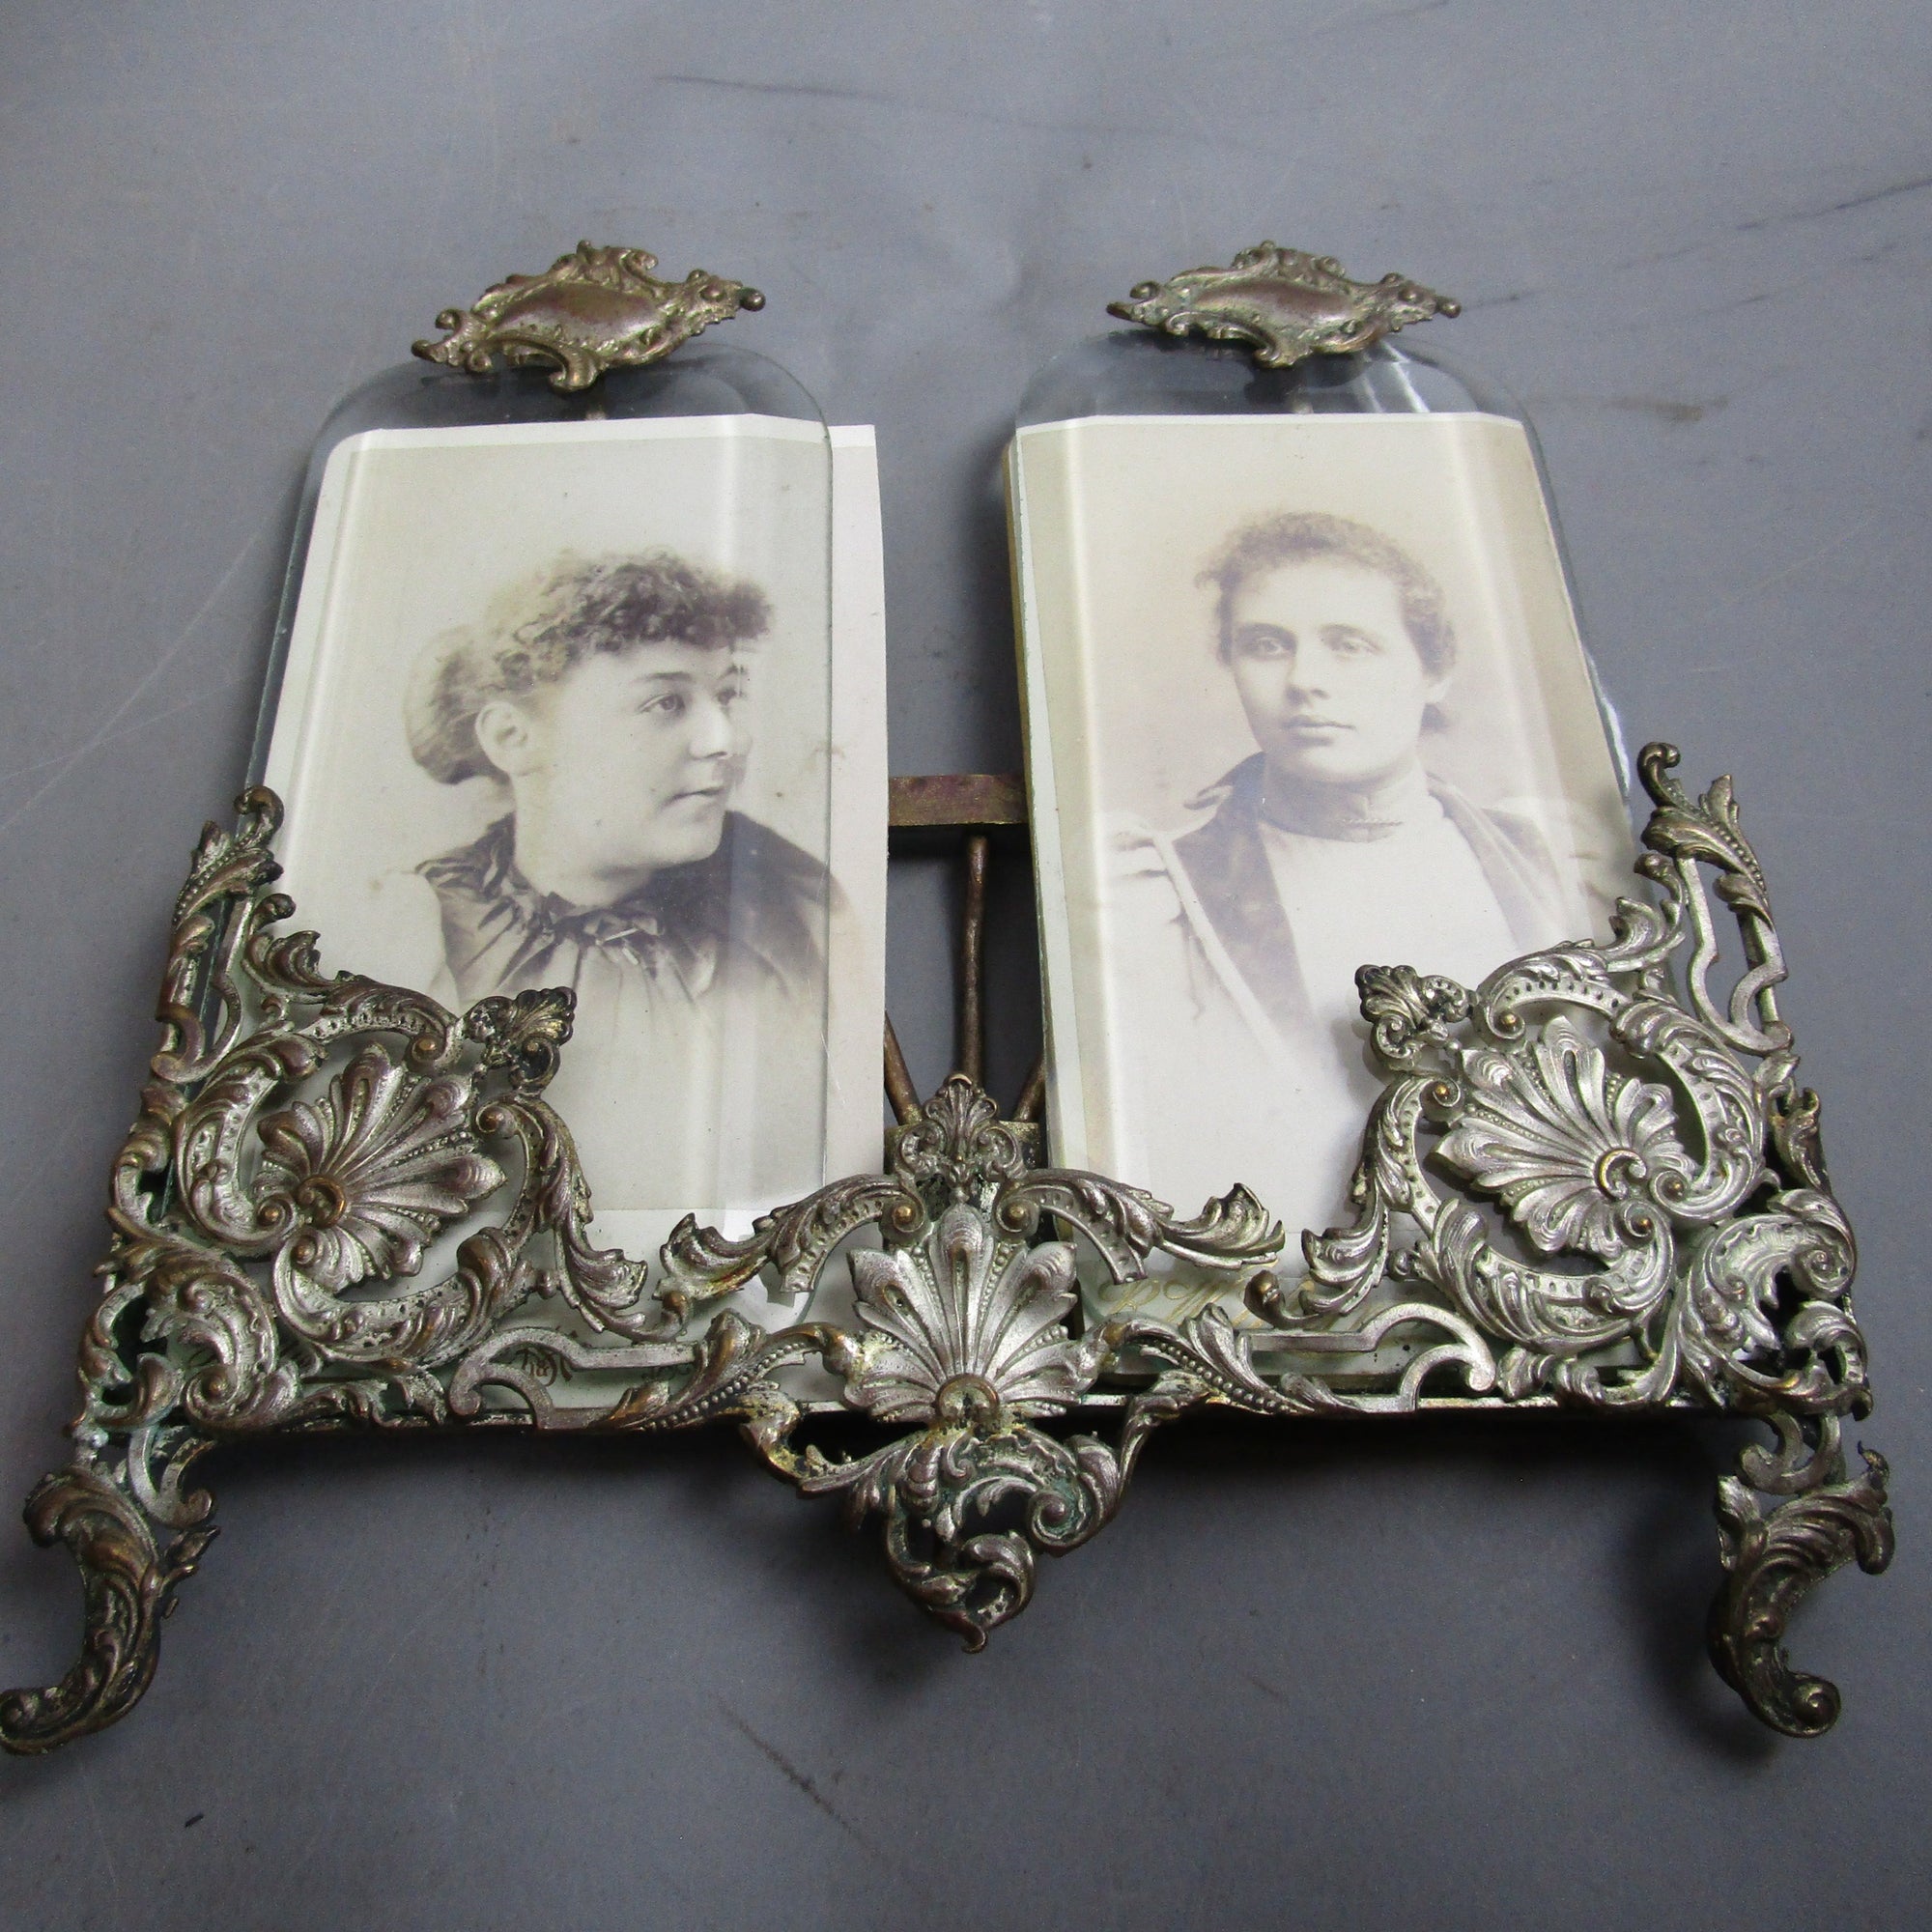 Rare Silver Washed Metal Bevelled Glass Ornate Union Photograph Picture Frame Antique Victorian Circa 1870